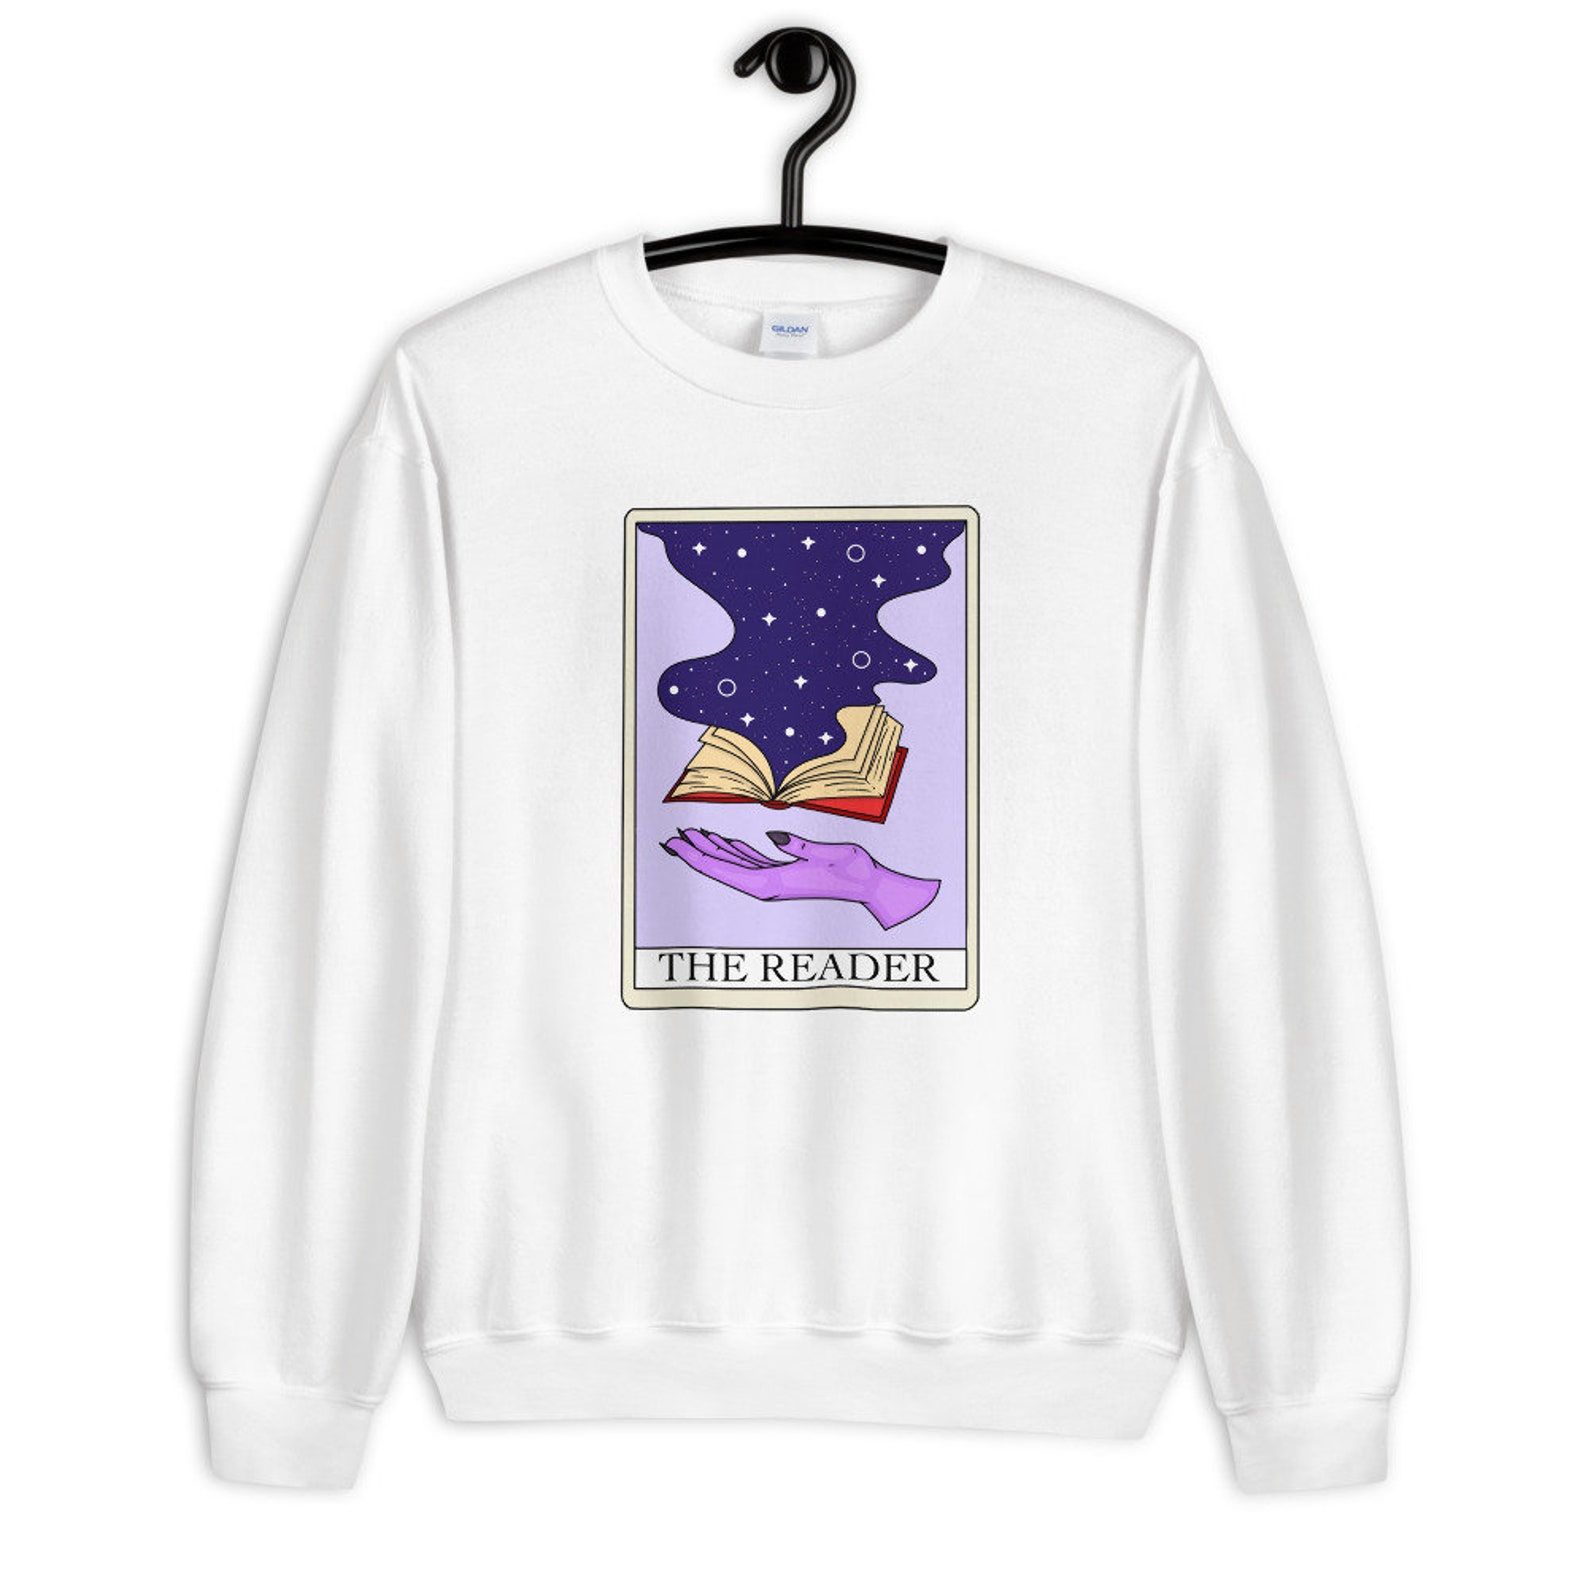 Image of a white sweatshirt with a purple tarot card in the middle. The card features a hand and a book and is titled "The Reader."